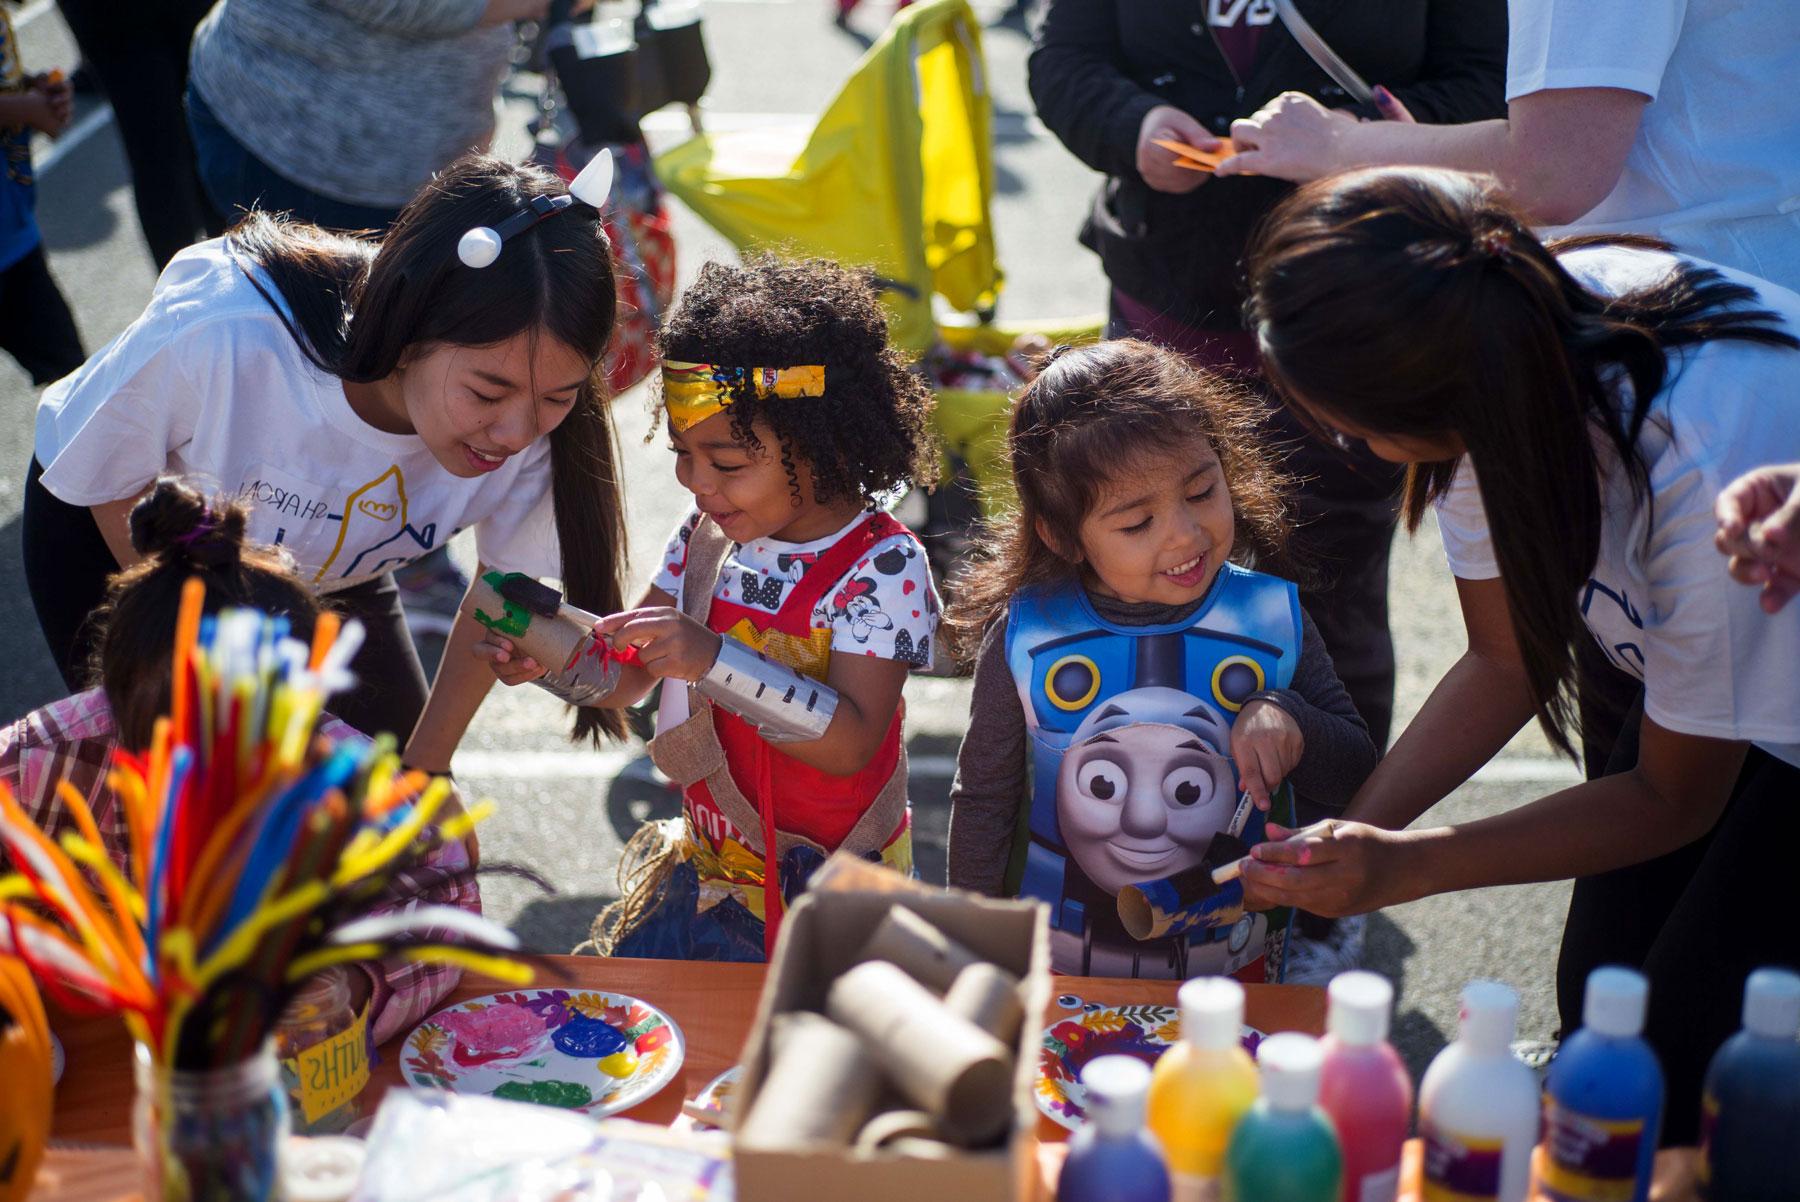 Student volunteers help two kids with their arts and crafts during a halloween event.